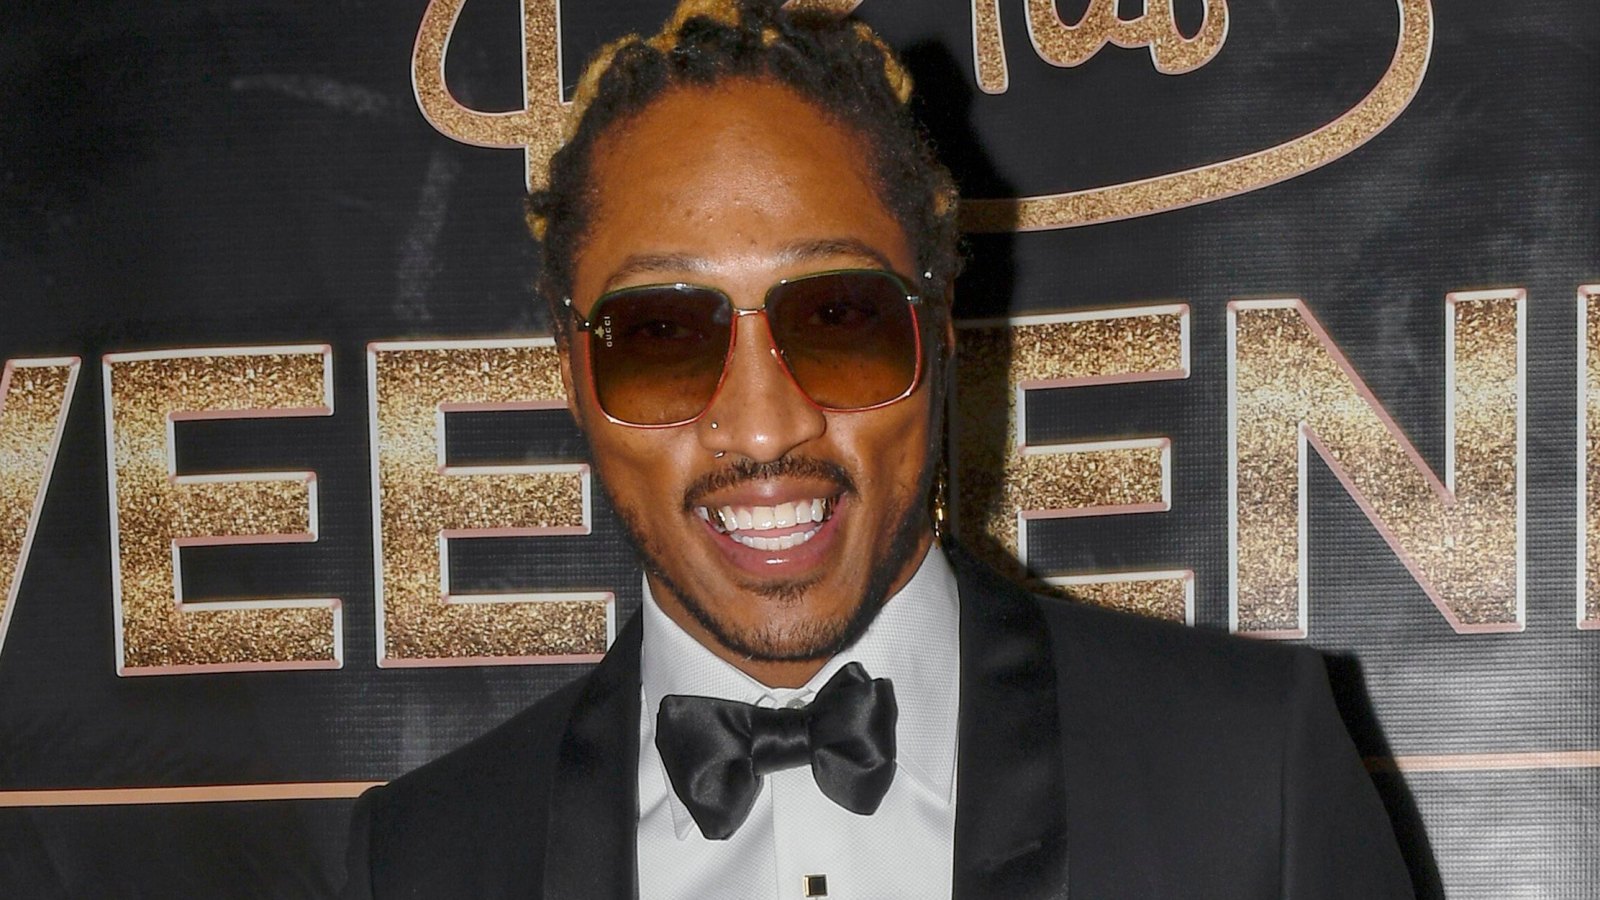 Future Finds Out He Has a 7th Baby Mama After Wishing 6 Exes Happy Mother’s Day